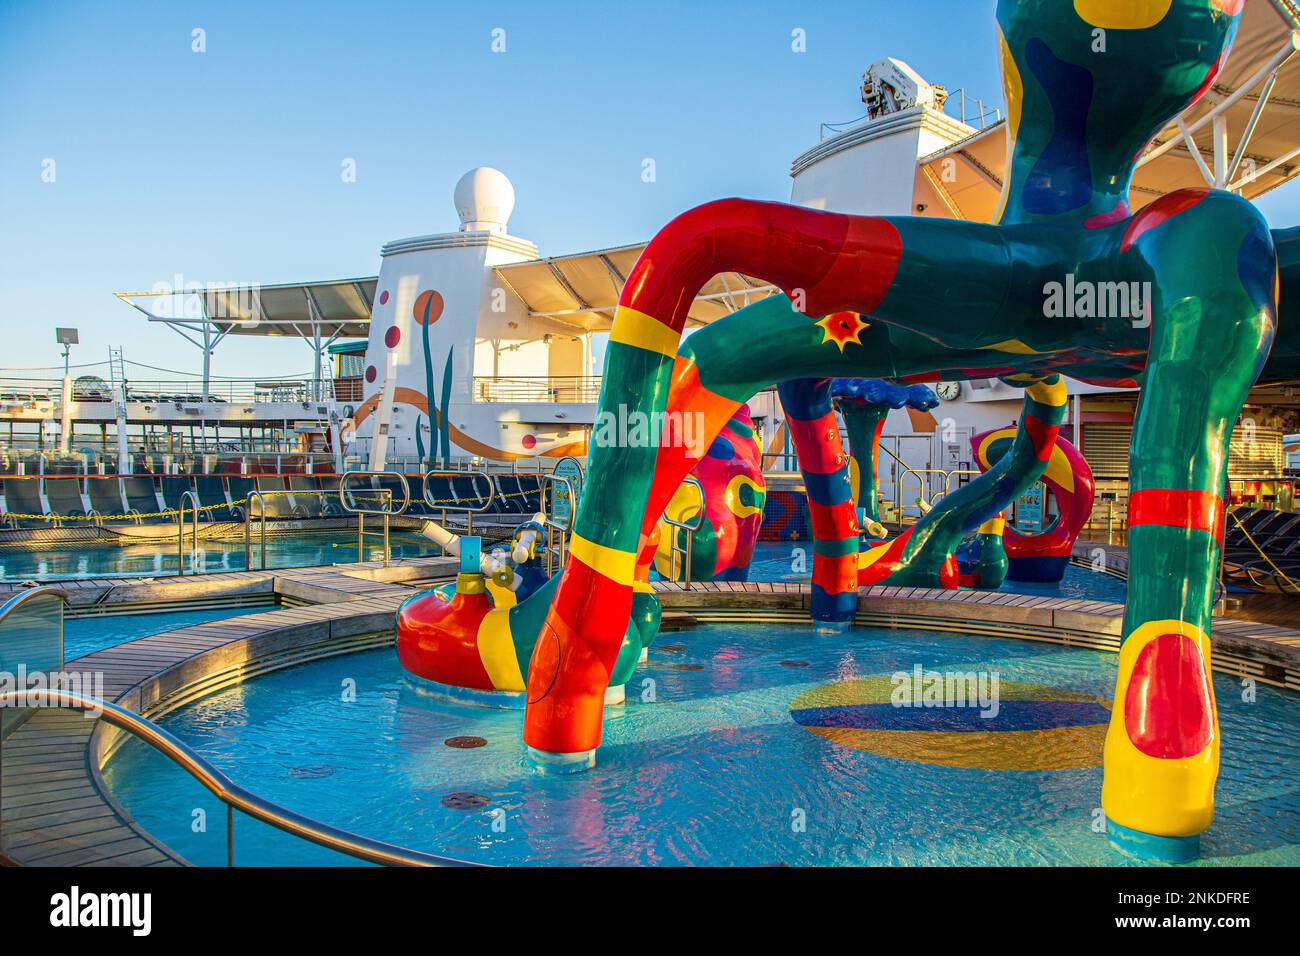 Pool area, Allure of the Seas, Royal Caribbean cruise lines. Stock Photo